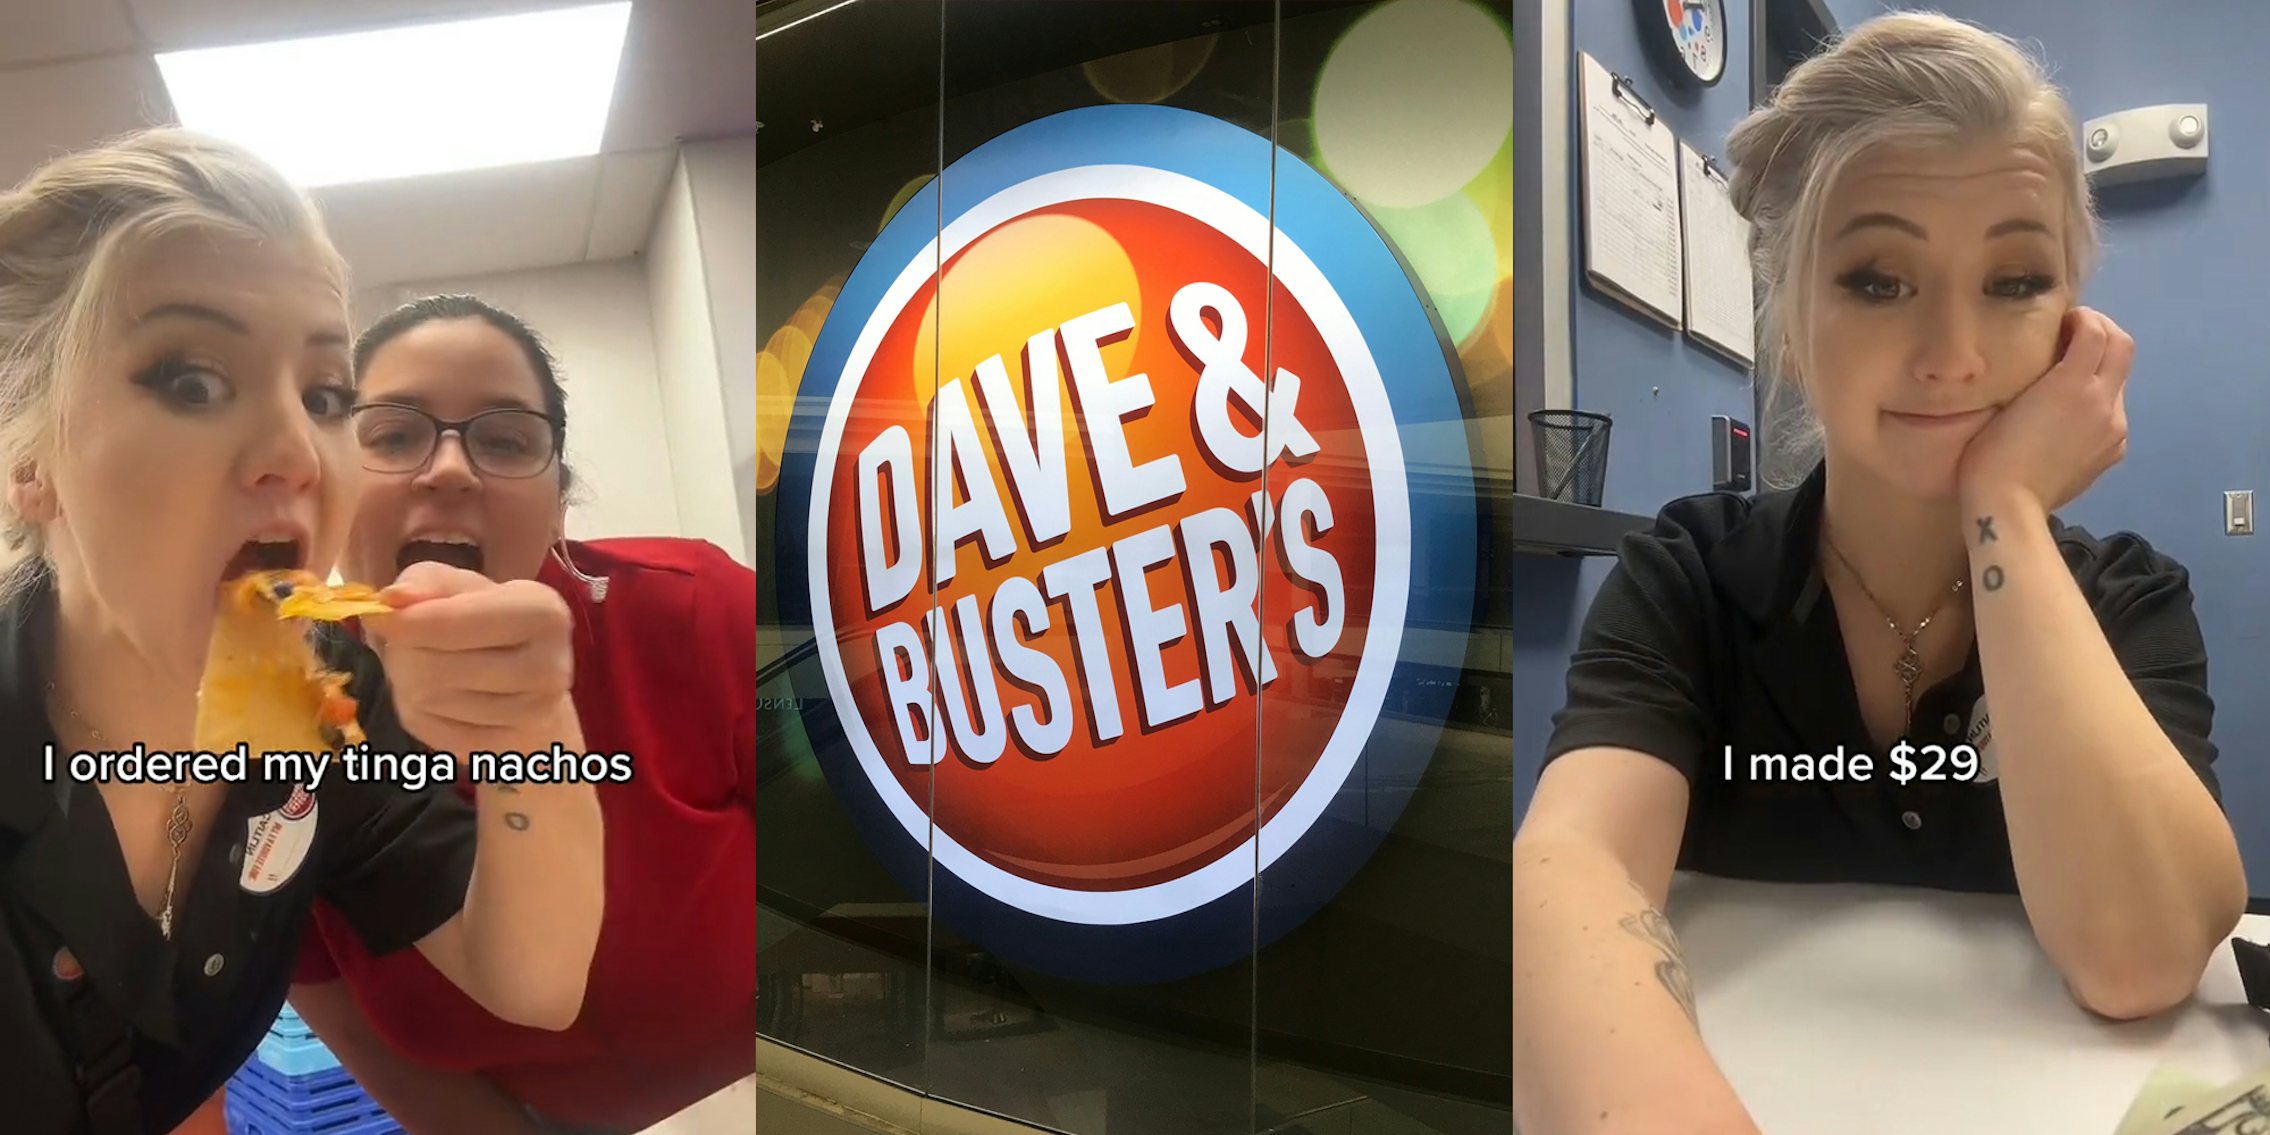 Dave & Buster's server eating nachos with caption 'I ordered my tinga nachos' (l) Dave & Buster's sign in glass display (c) Dave & Buster's server with cash and caption 'I made $29' (r)